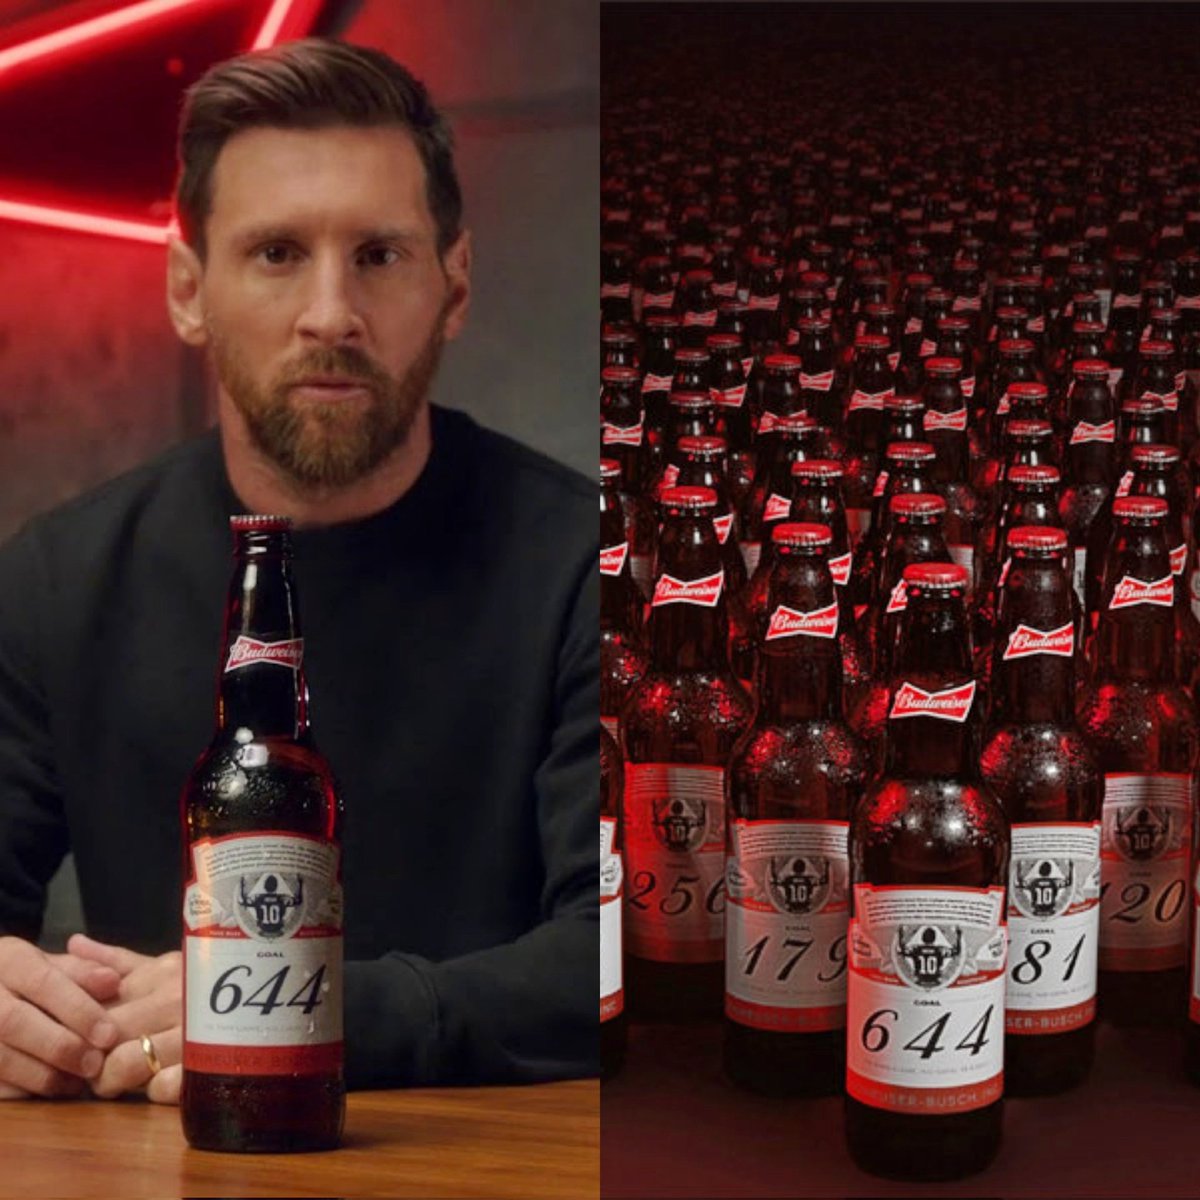 Remember when Budweiser celebrated Lionel Messi's record-breaking 644 goals for Barcelona by sending personalized beers to the 160 goalkeepers he scored against.🍻 A Thread on Goalkeepers Receiving Their Bottles😅👇